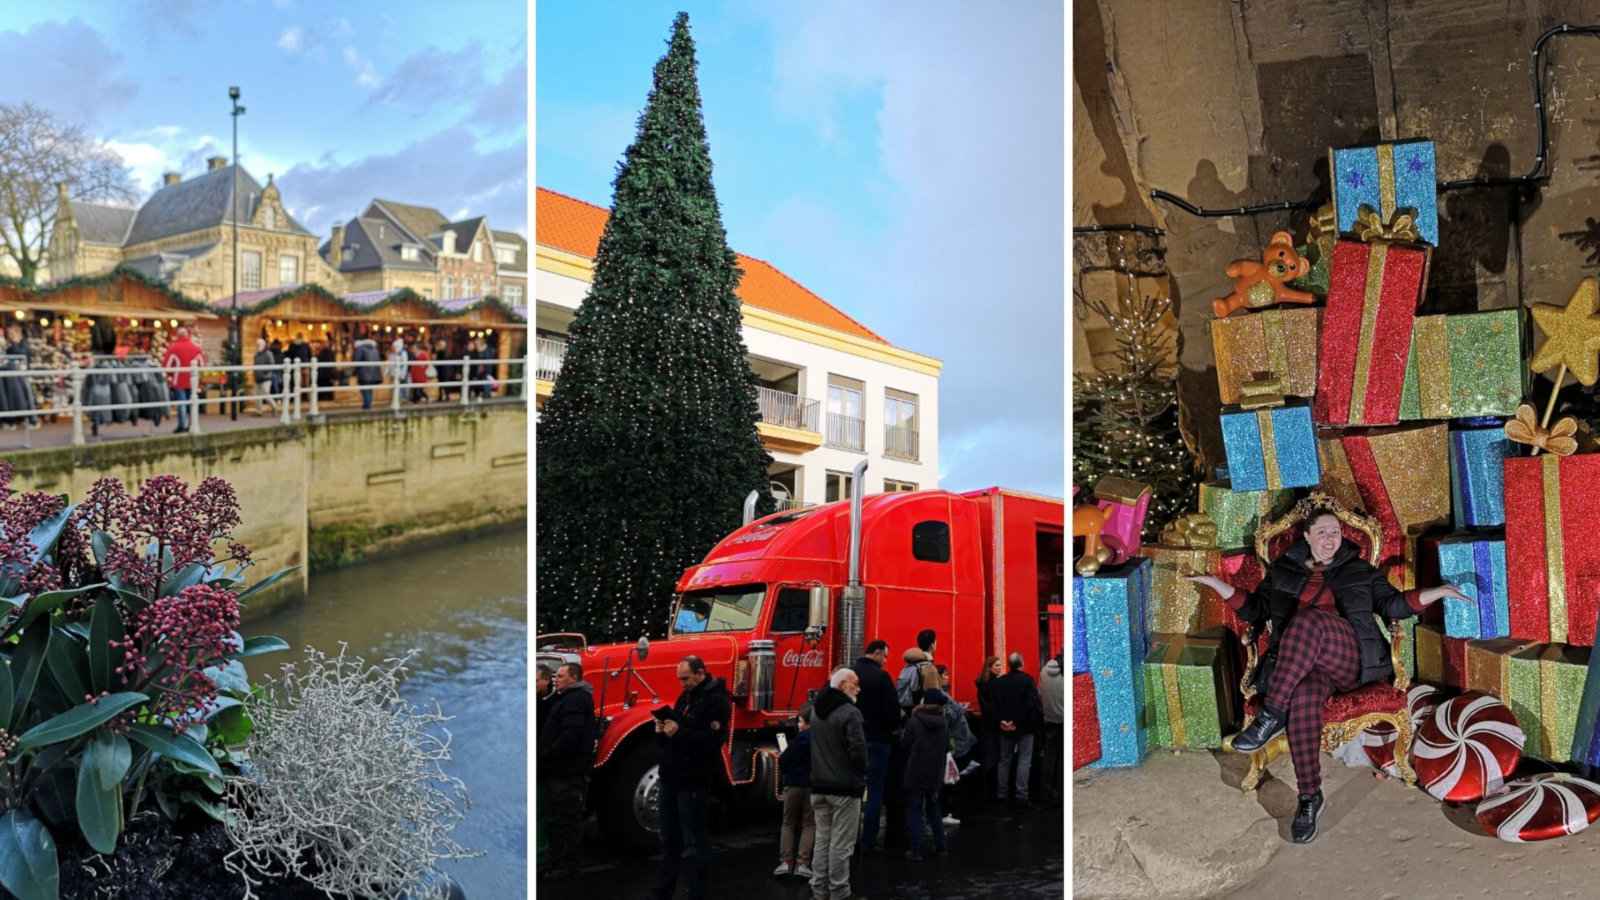 Find out what it's like to visit the Dutch city of Valkenburg, which goes all out for Christmas!